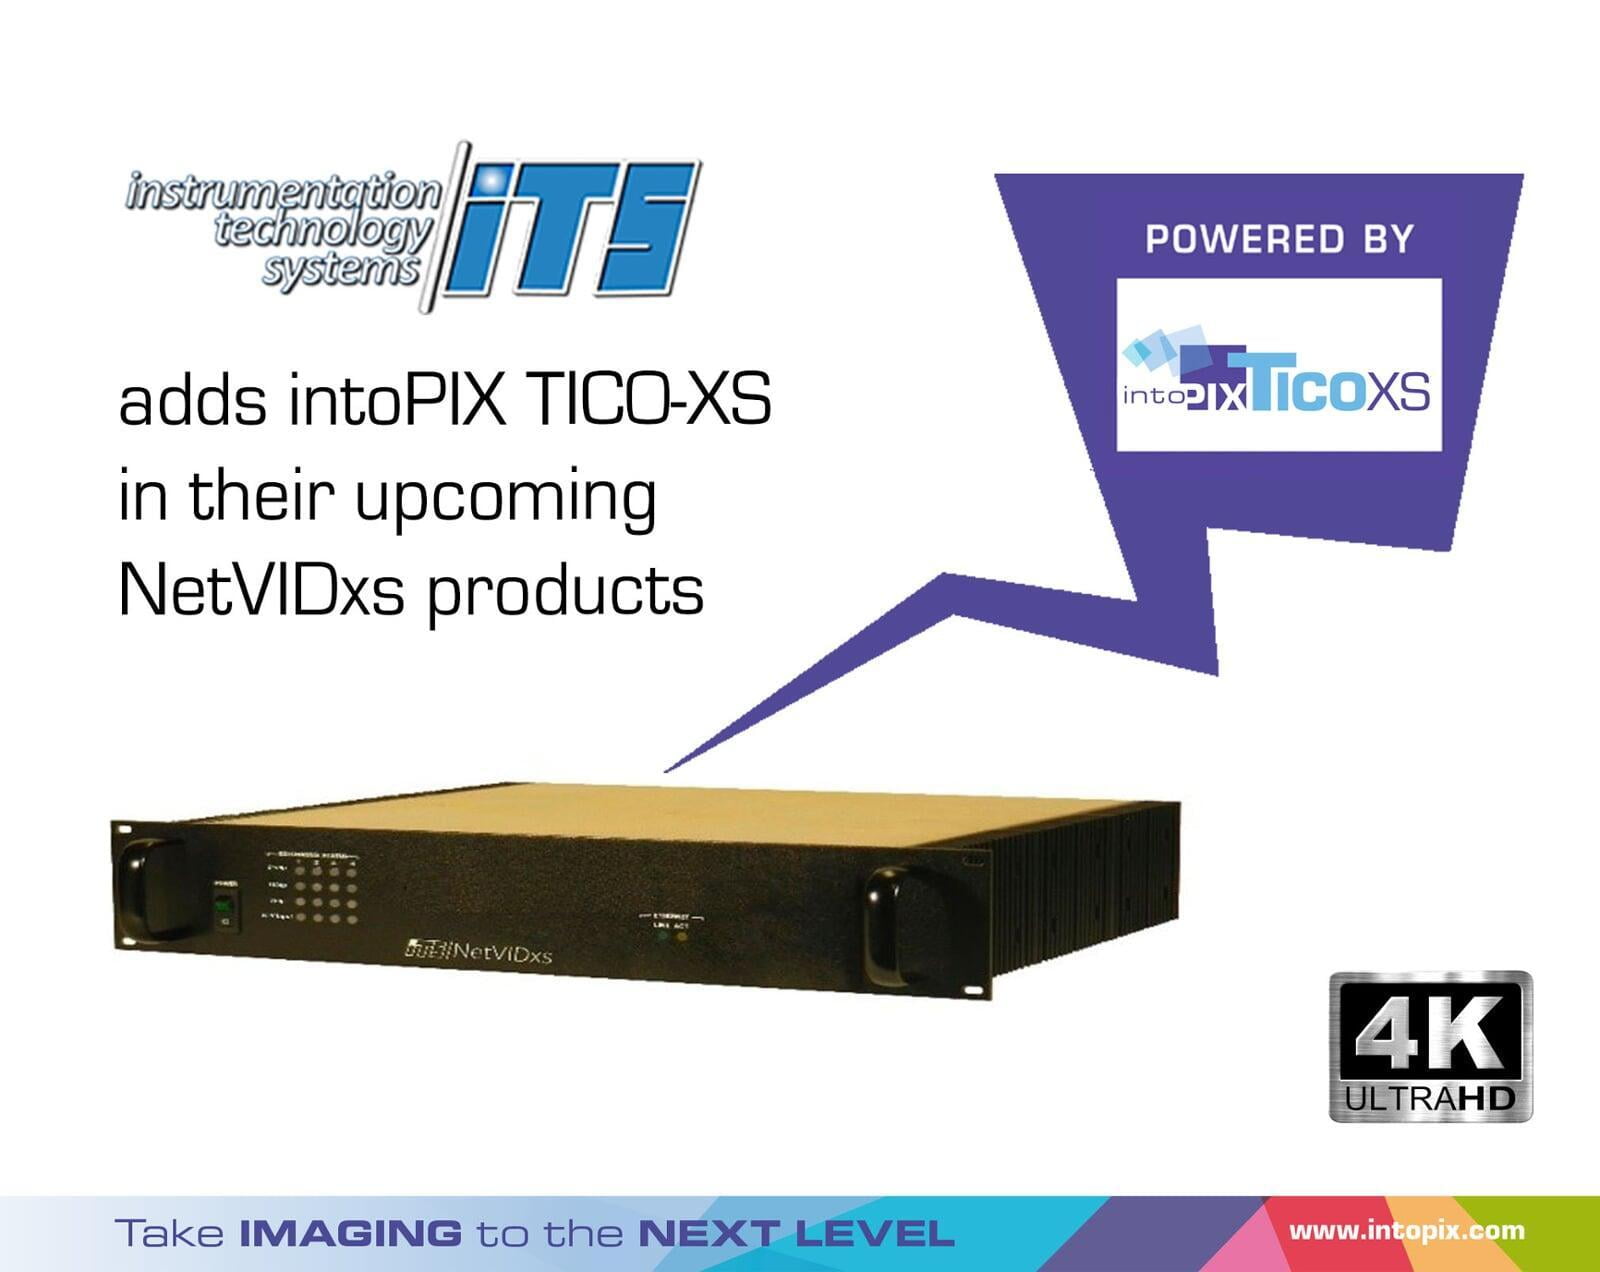 Instrumentation Technology Systems adds intoPIX TICO-XS to their upcoming NetVIDxs